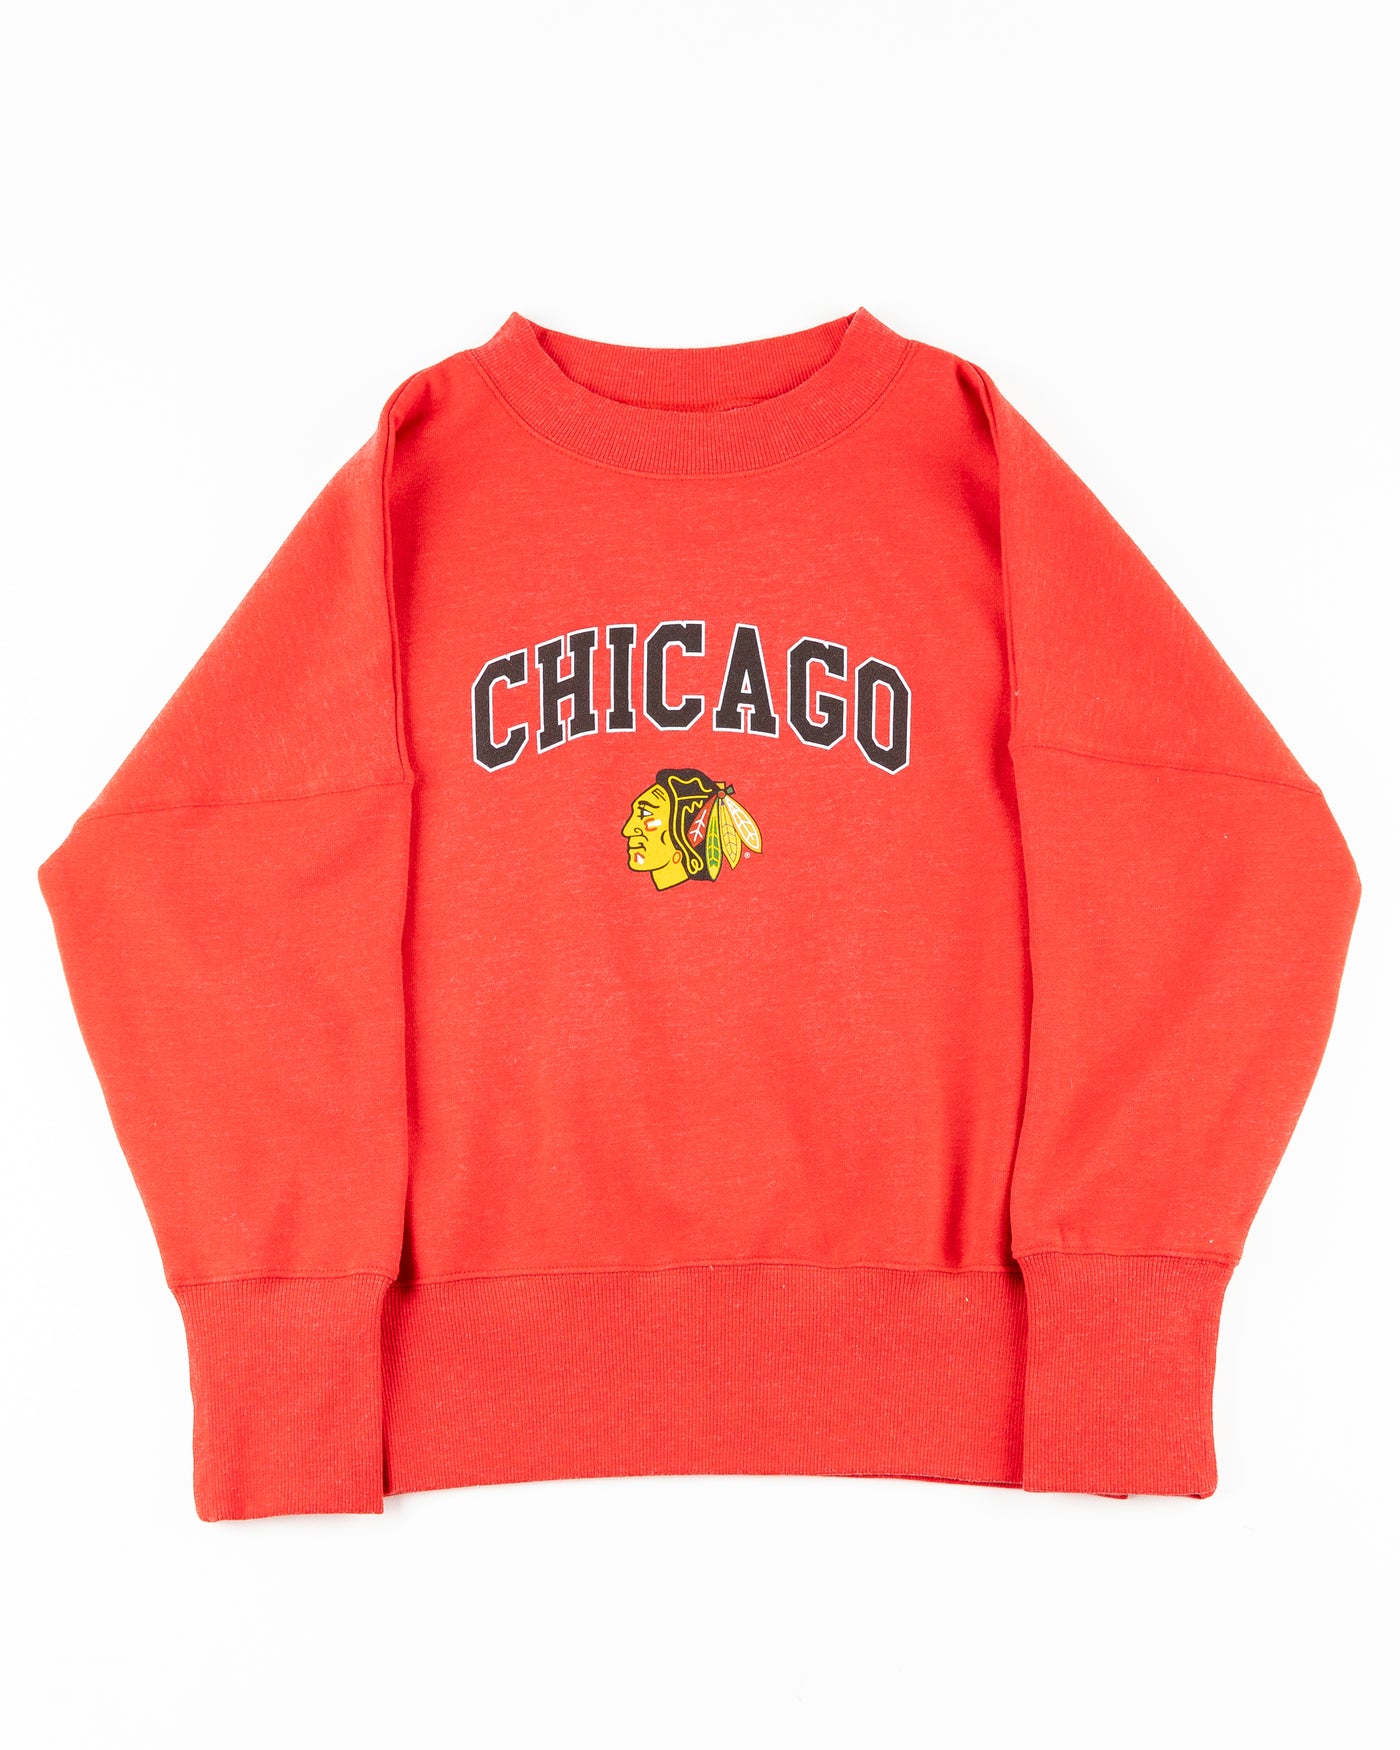 red ladies crewneck with Chicago wordmark and Chicago Blackhawks primary logo across front - front lay flat